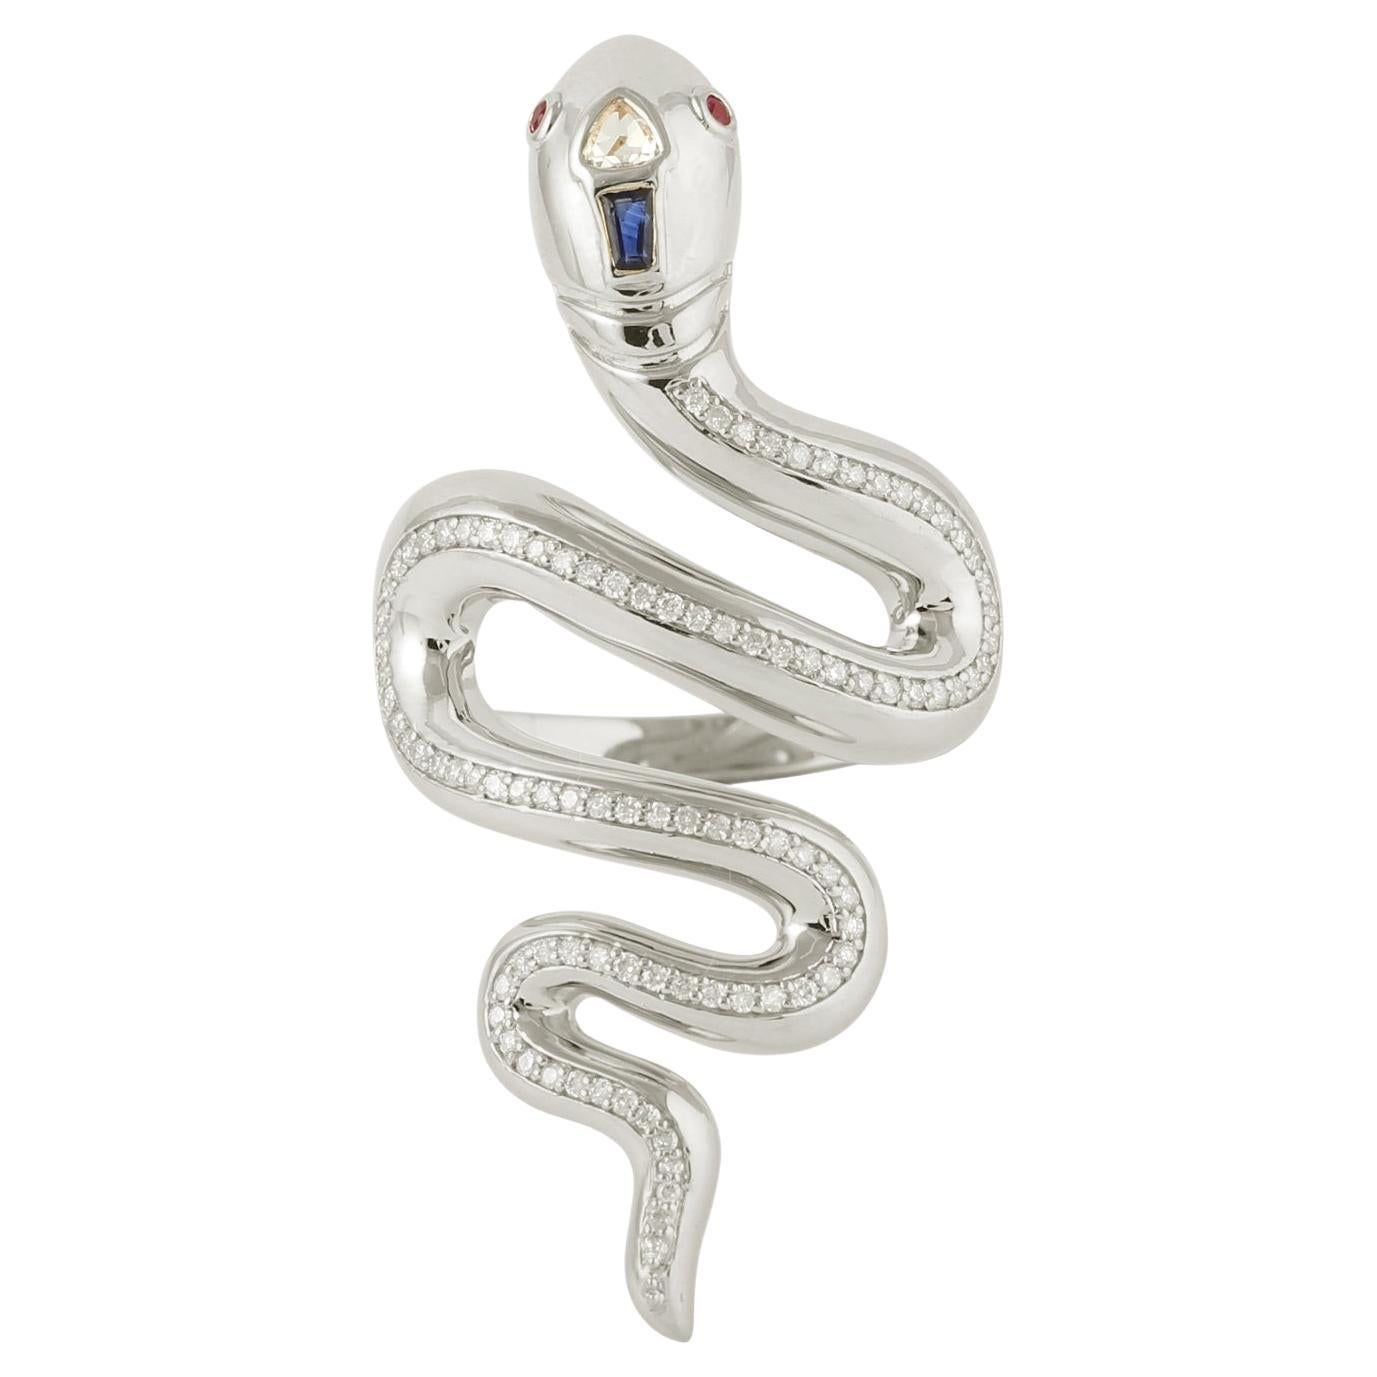 Snake Shaped Ring With Ruby , Sapphire & Diamonds Made In 14k White Gold